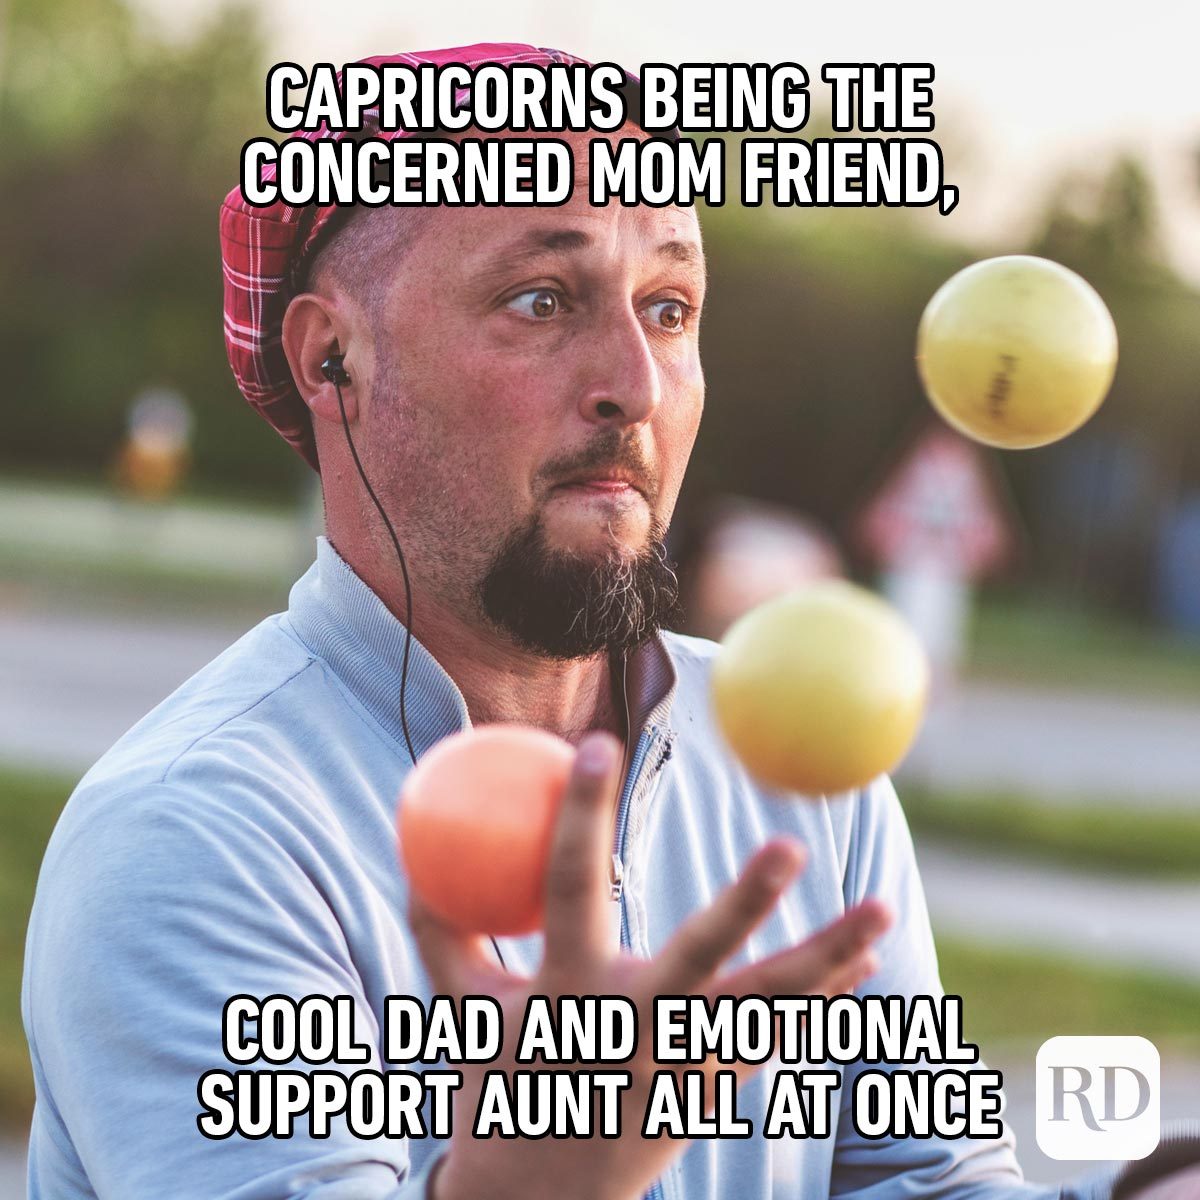 Hilarious Zodiac Memes That'll Crack You Up Capricorn juggling stressed mon friend cool dad emotional support aunt